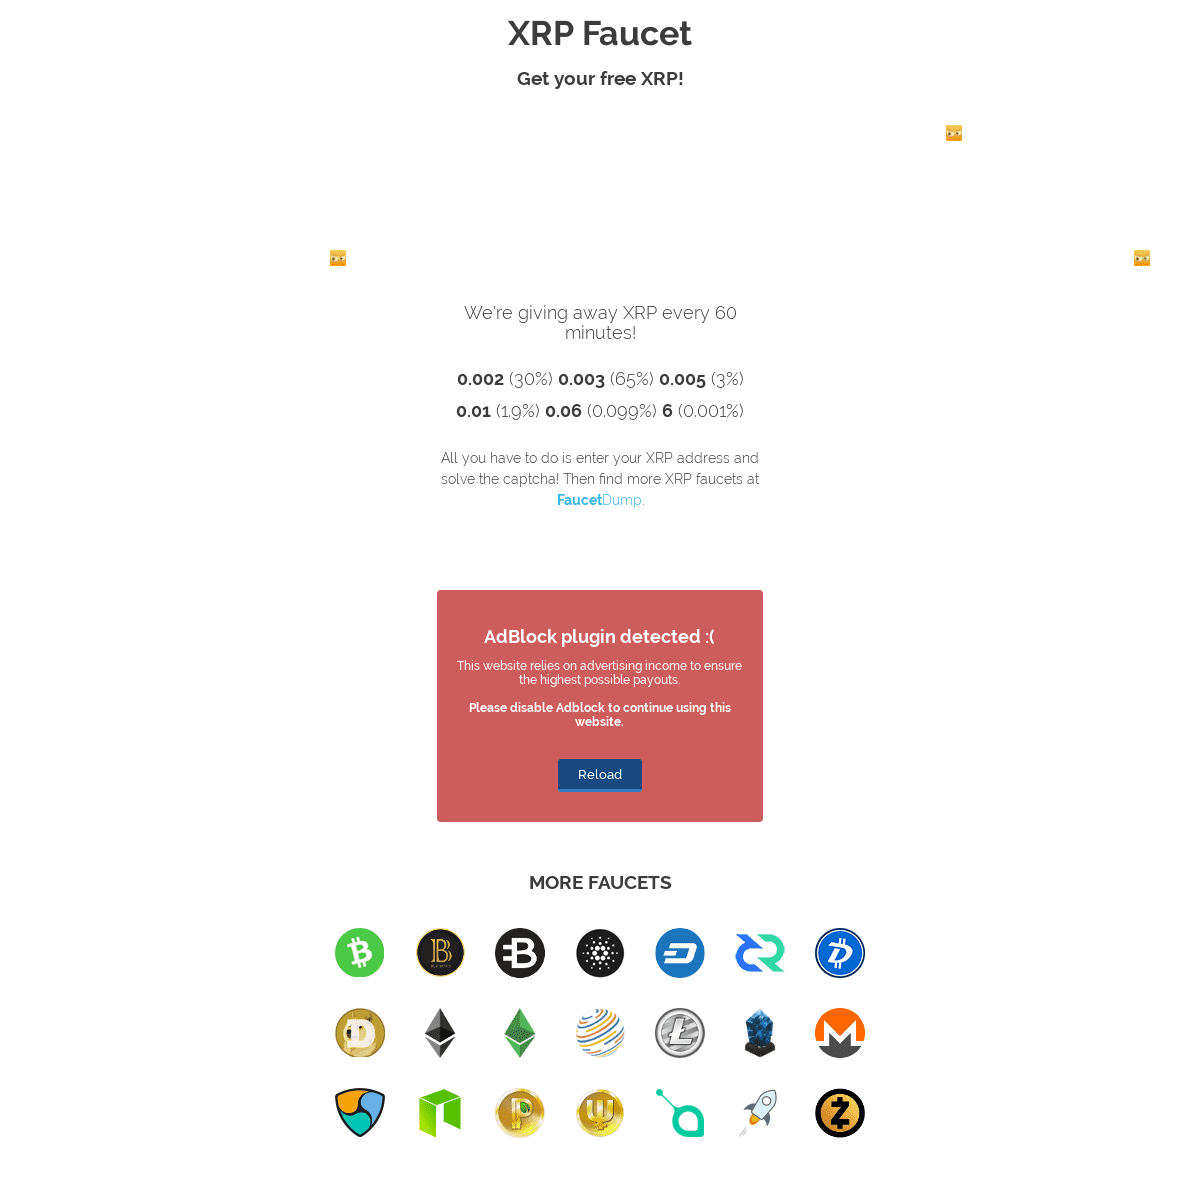 Free XRP from the XRP Faucet!